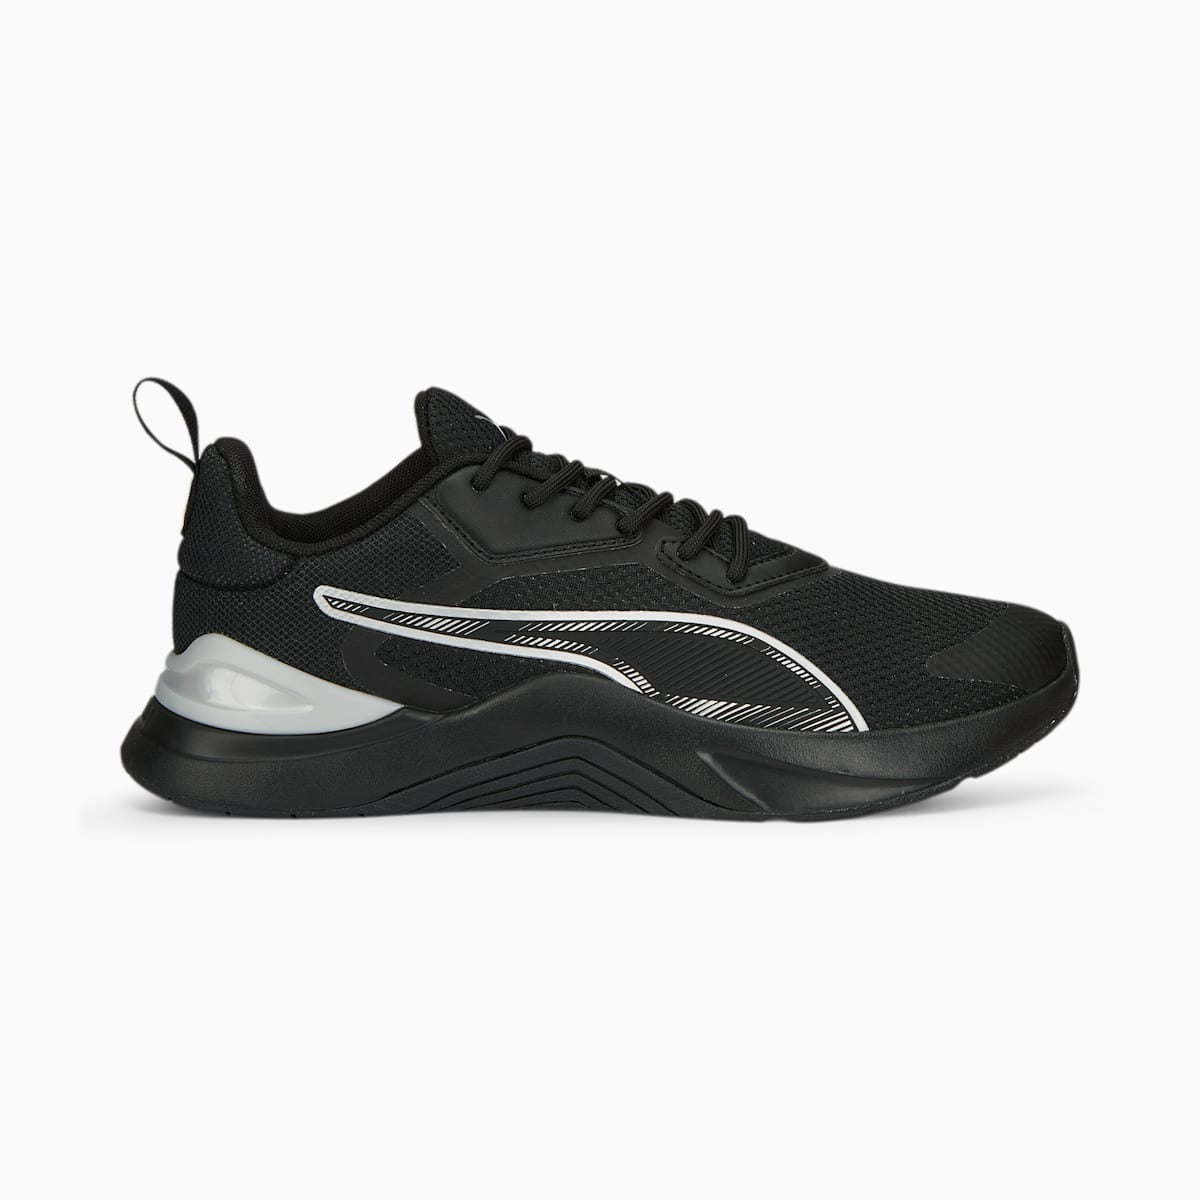 PUMA INFUSION WN S 37811501 RUNNING SHOES (W)